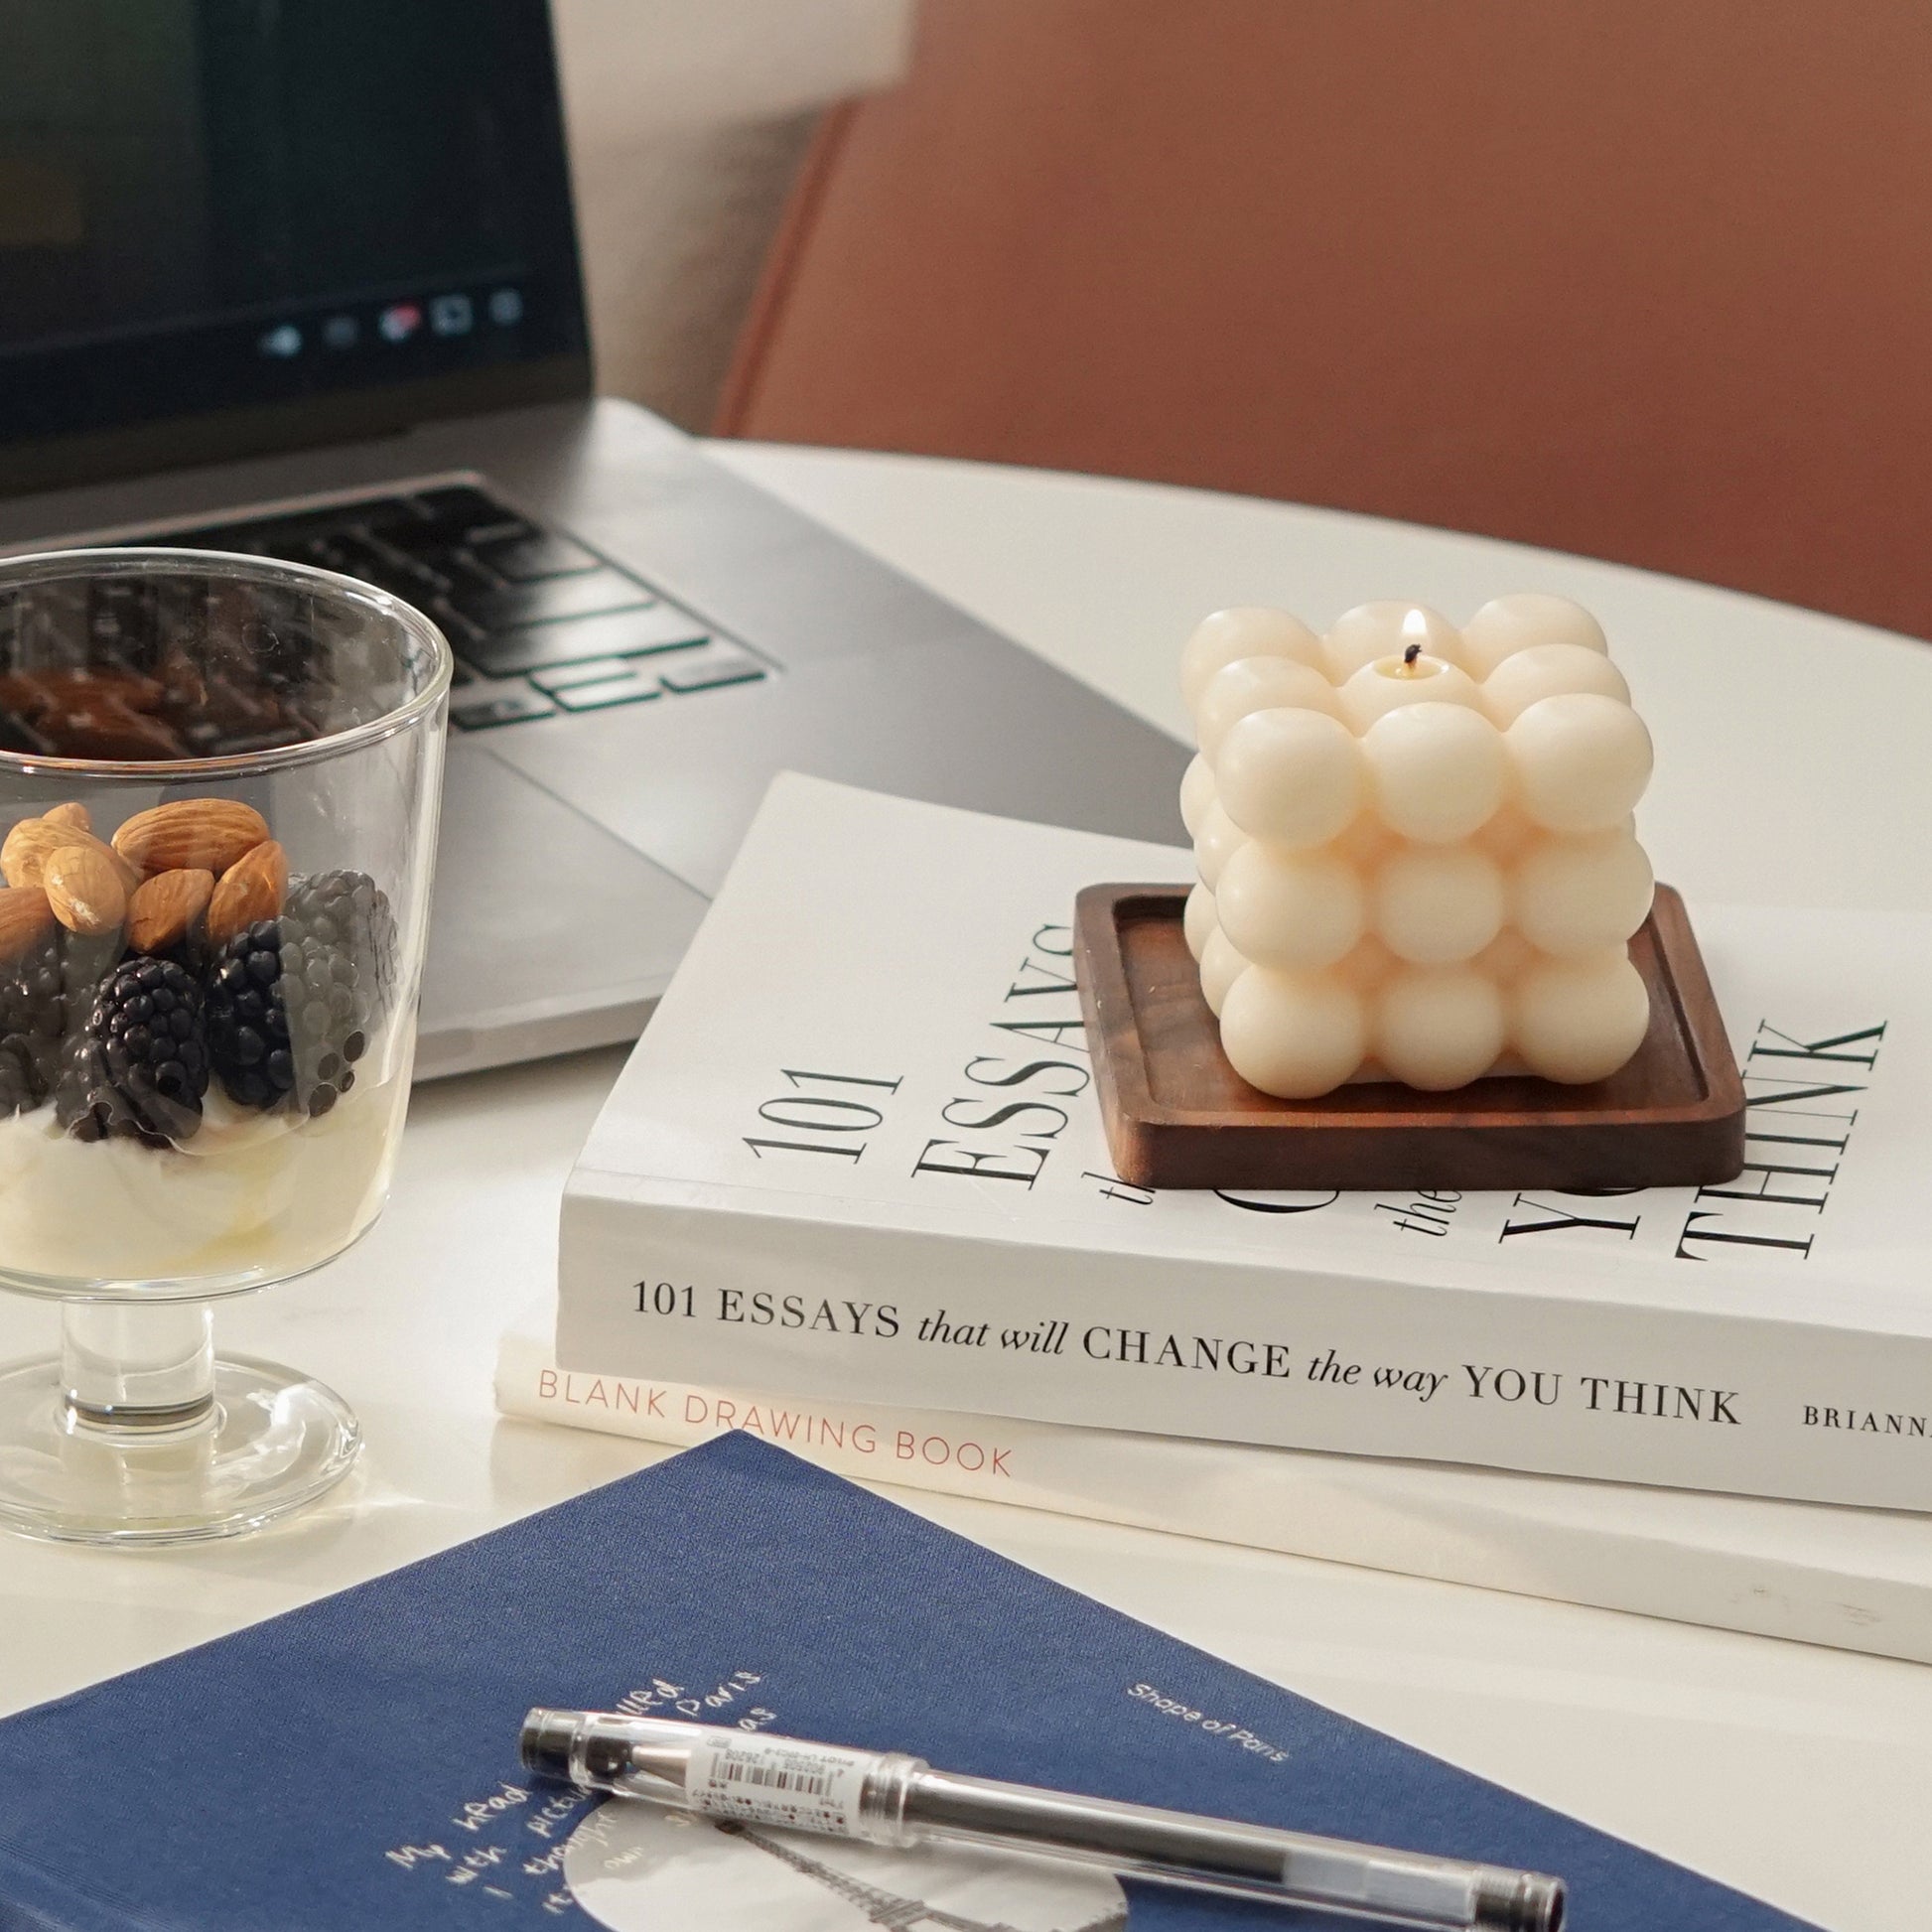 space gray macbook pro playing youtube playlist, yogurt in a tumbler glass, airpods, blue planner, a pen, a lit square cube bubble soy pillar candle on a wood square coaster placed on books